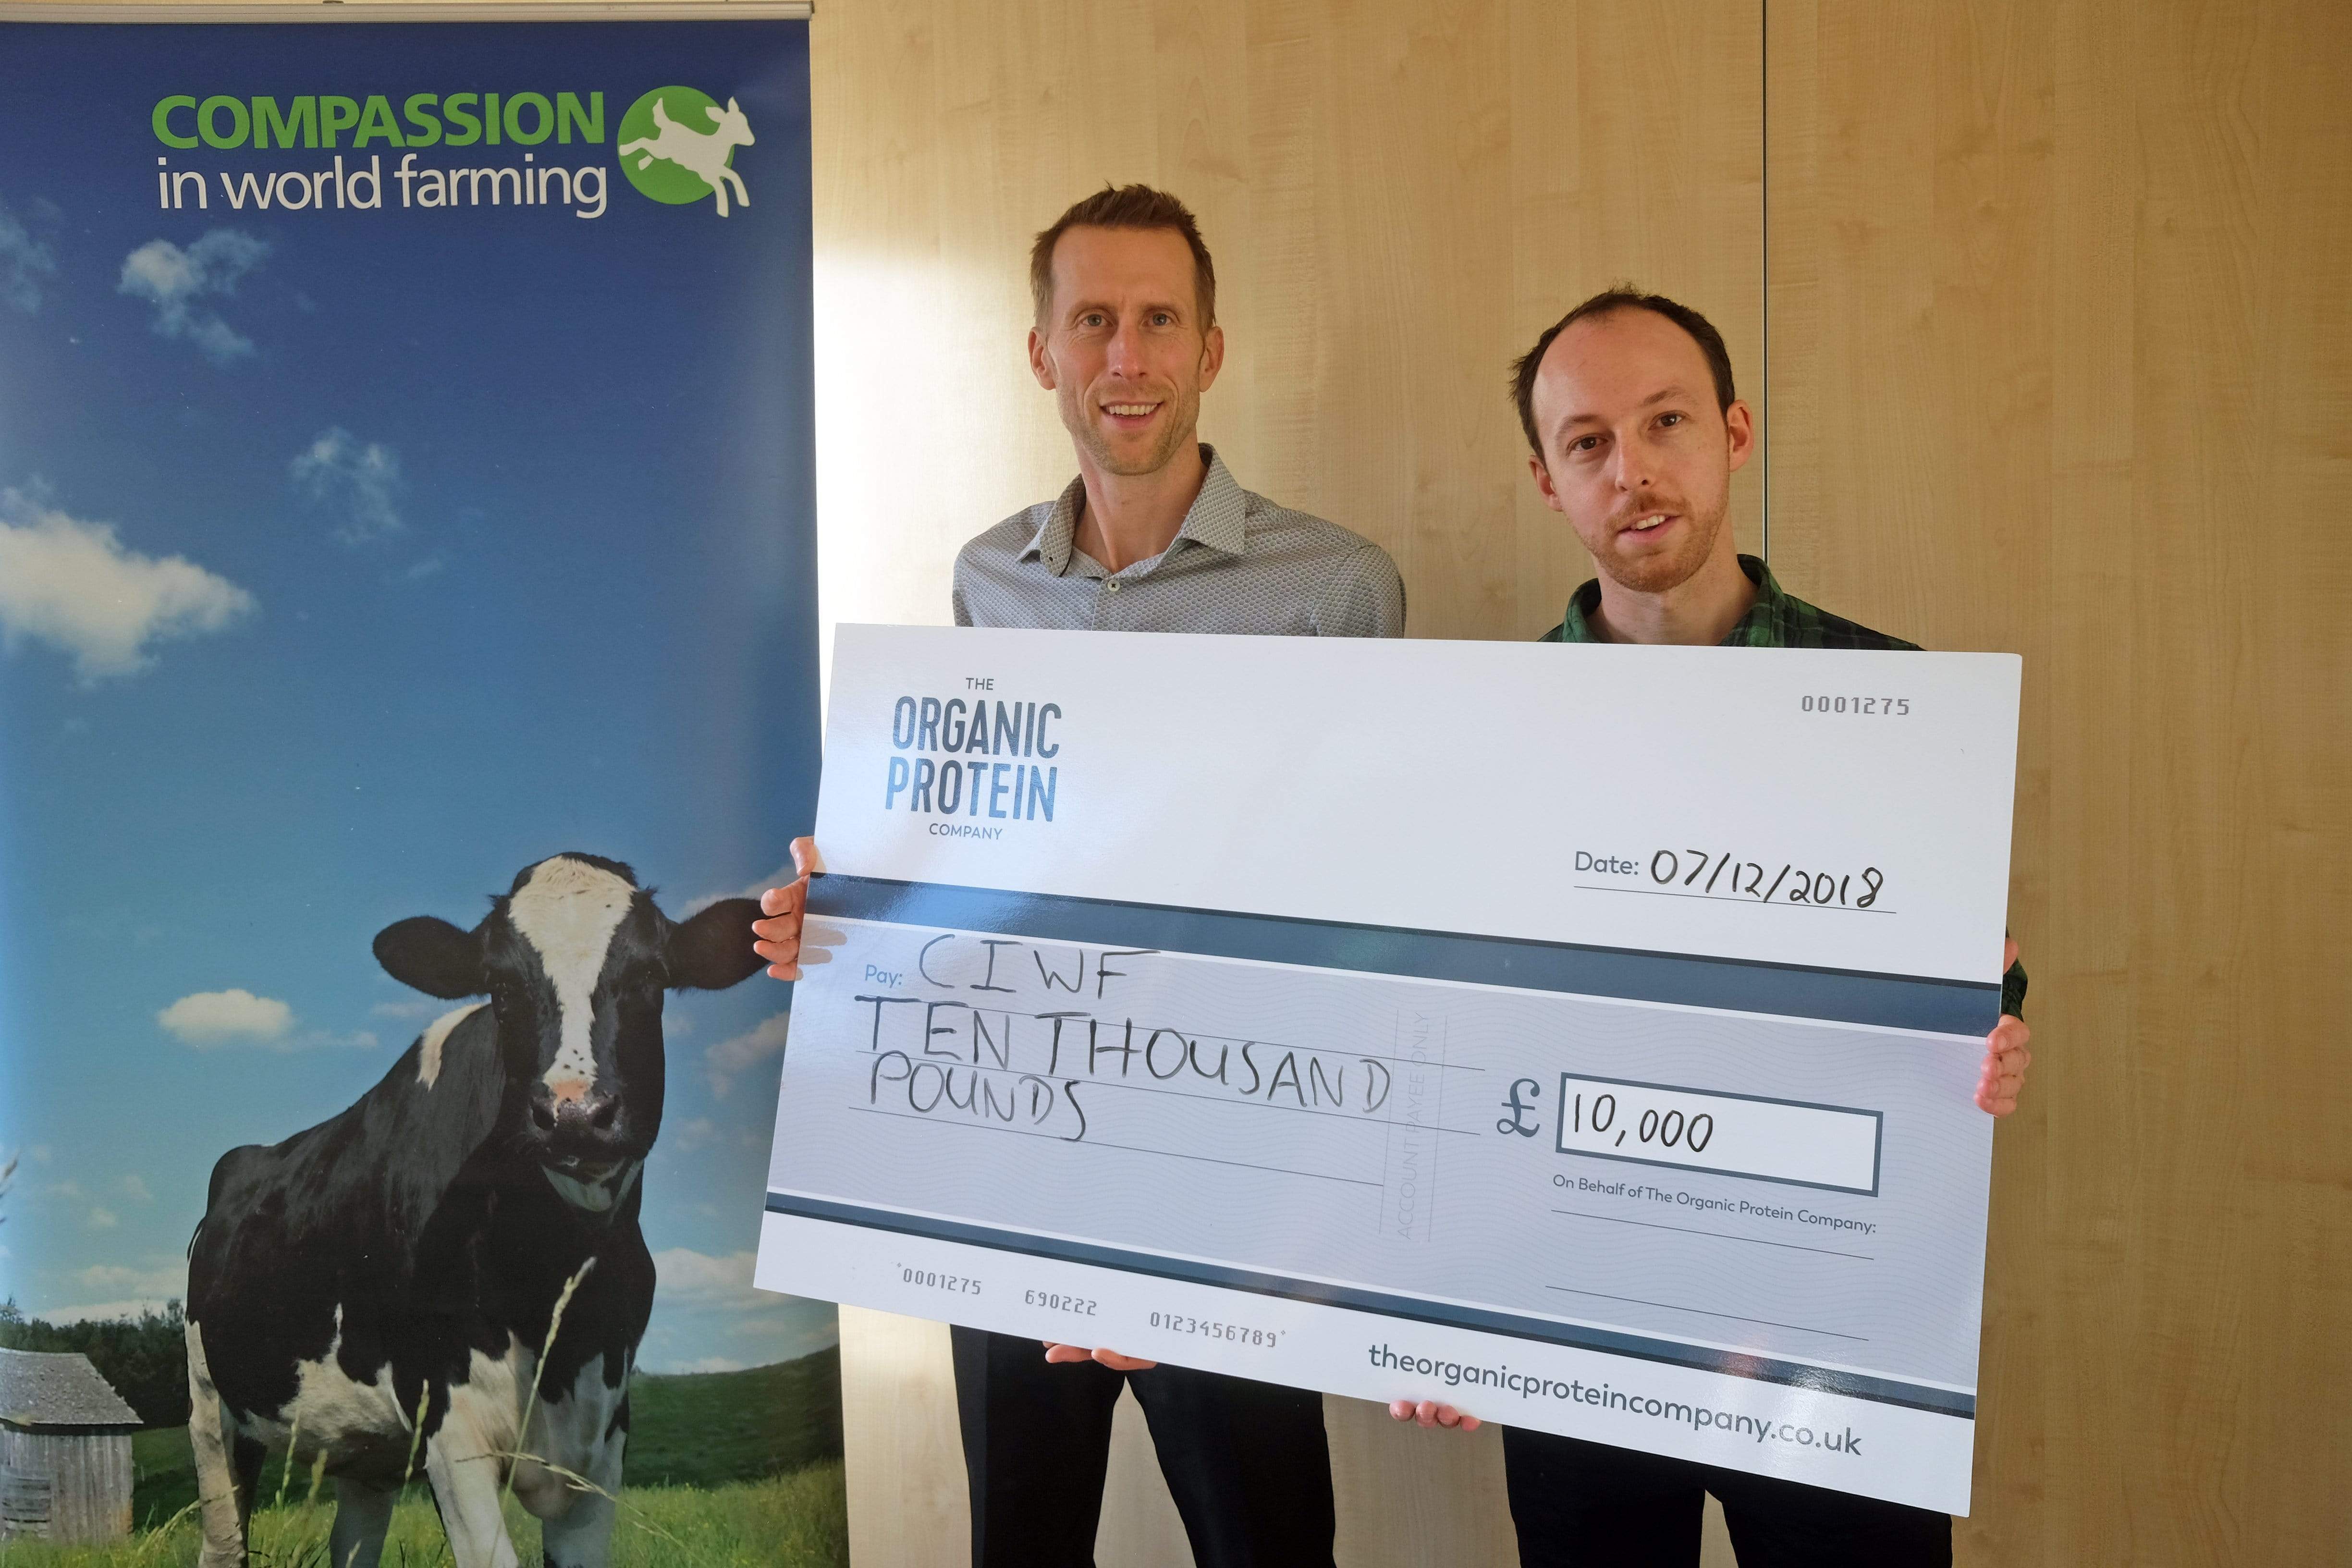 £10,000 donated to Compassion in World Farming!